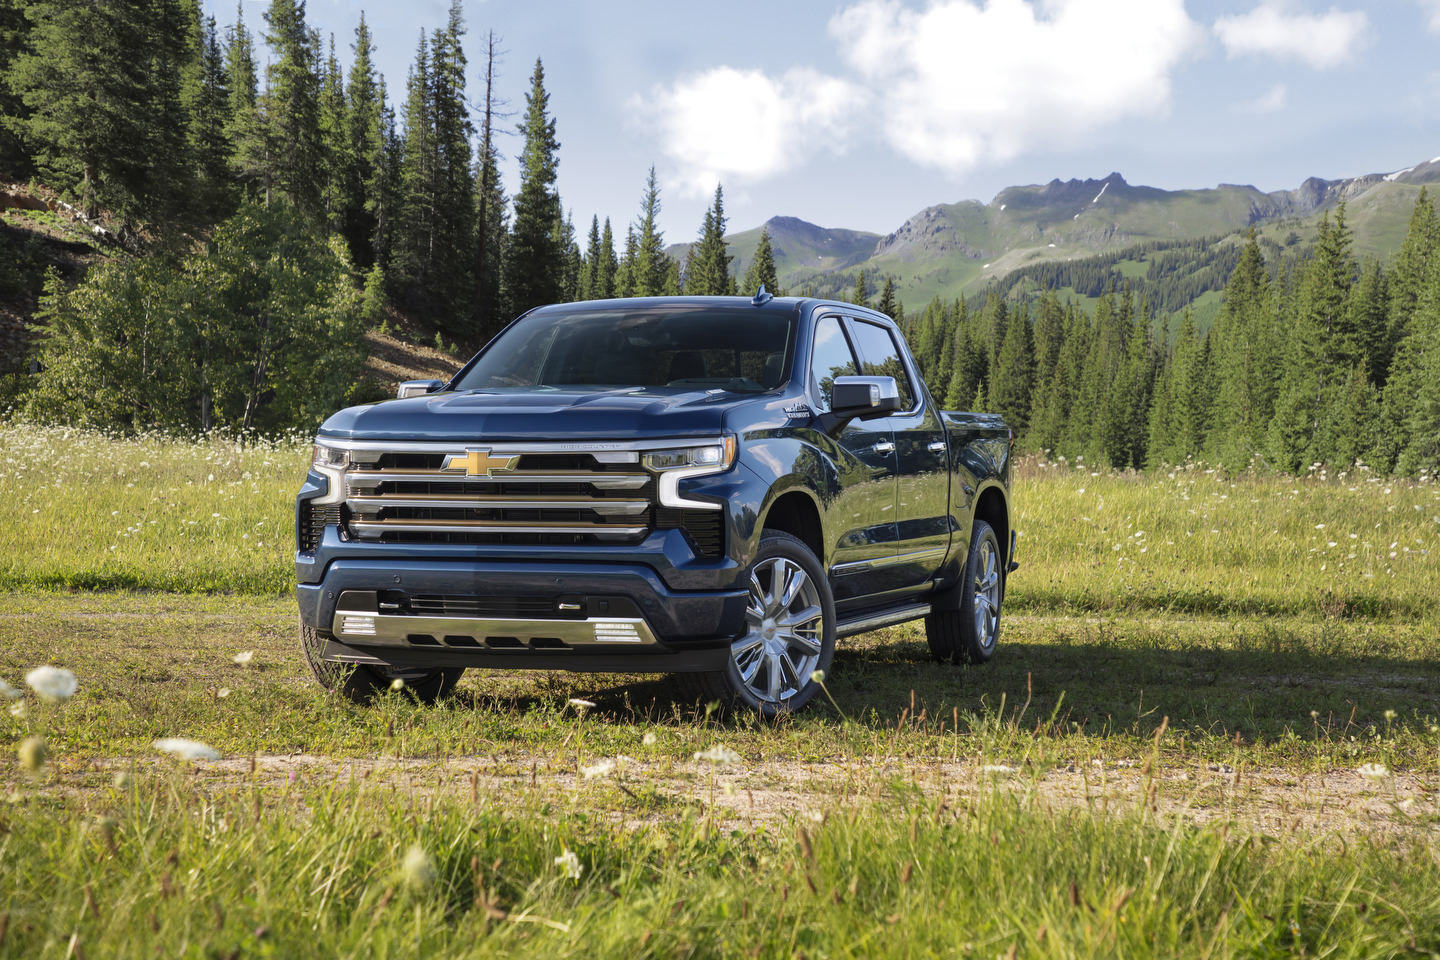 Why the 2.7L Turbo Engine Should Be Your Pick for the Chevrolet Silverado and GMC Sierra